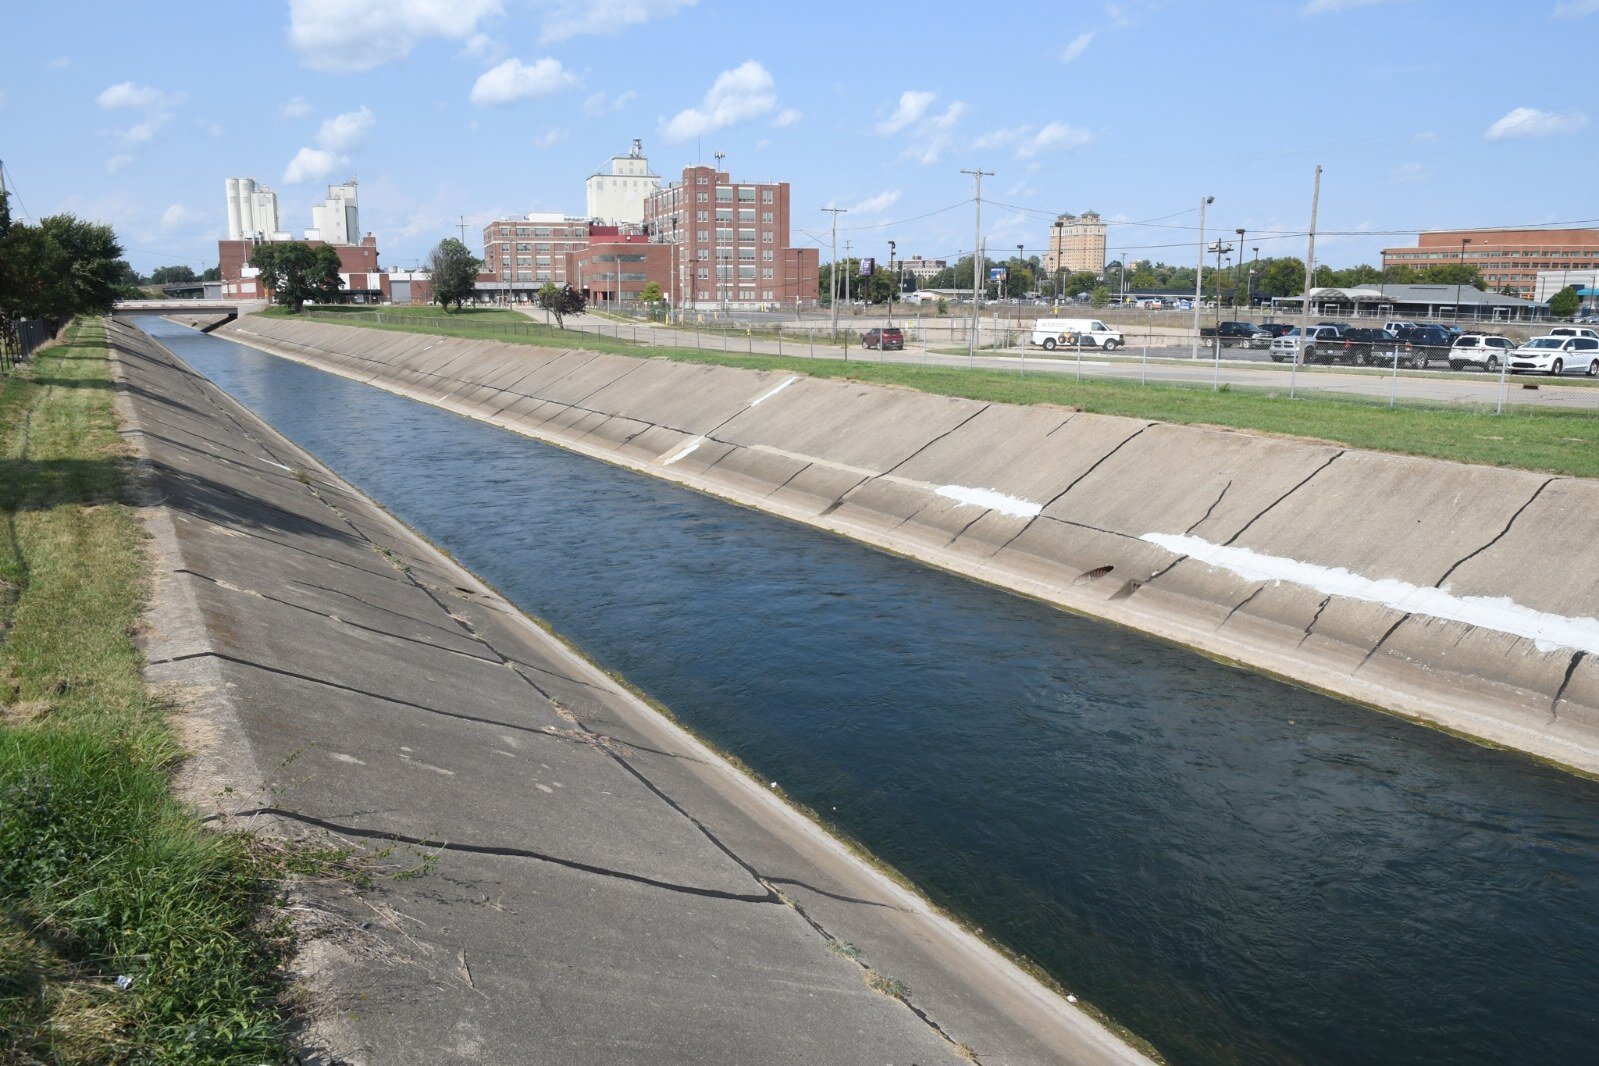 Looking east along the Kalamazoo River from Capital Avenue, south of downtown Battle Creek.